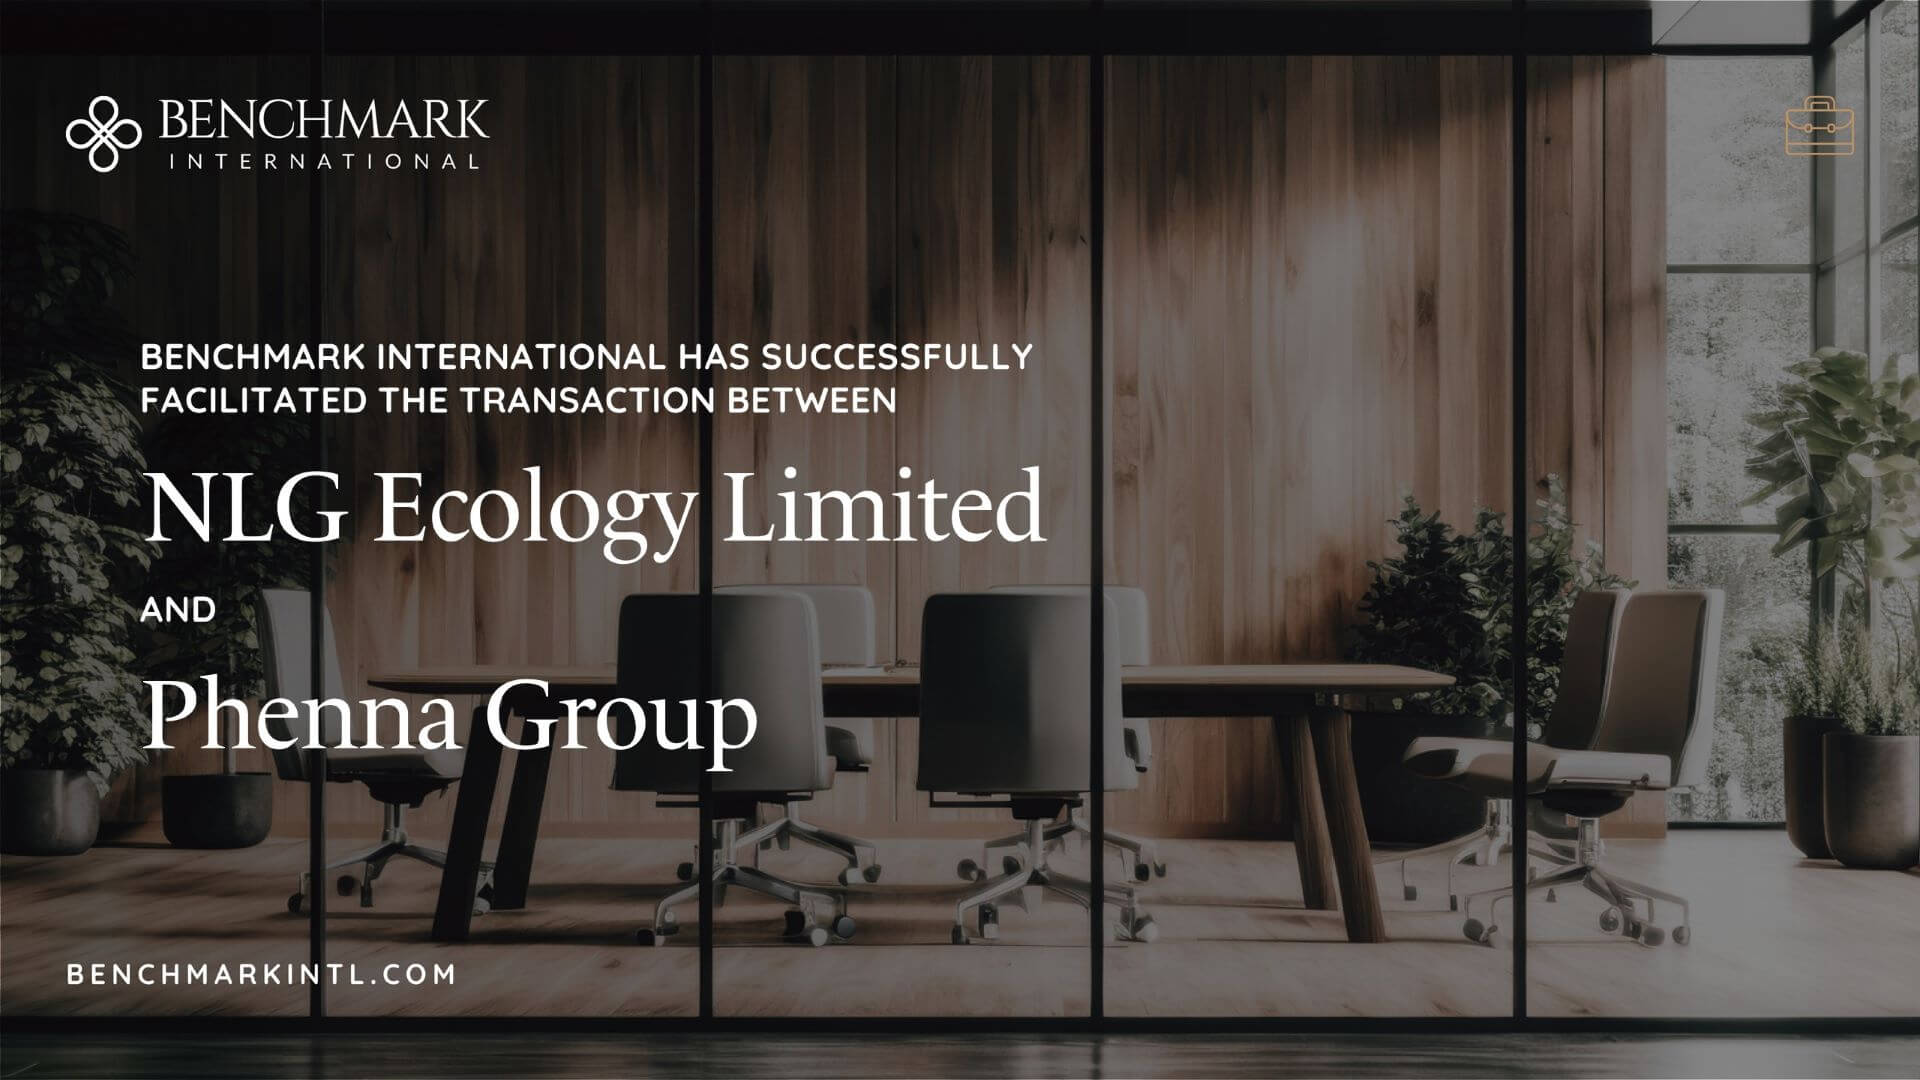 Benchmark International Successfully Facilitated the Transaction Between NLG Ecology Limited and Phenna Group